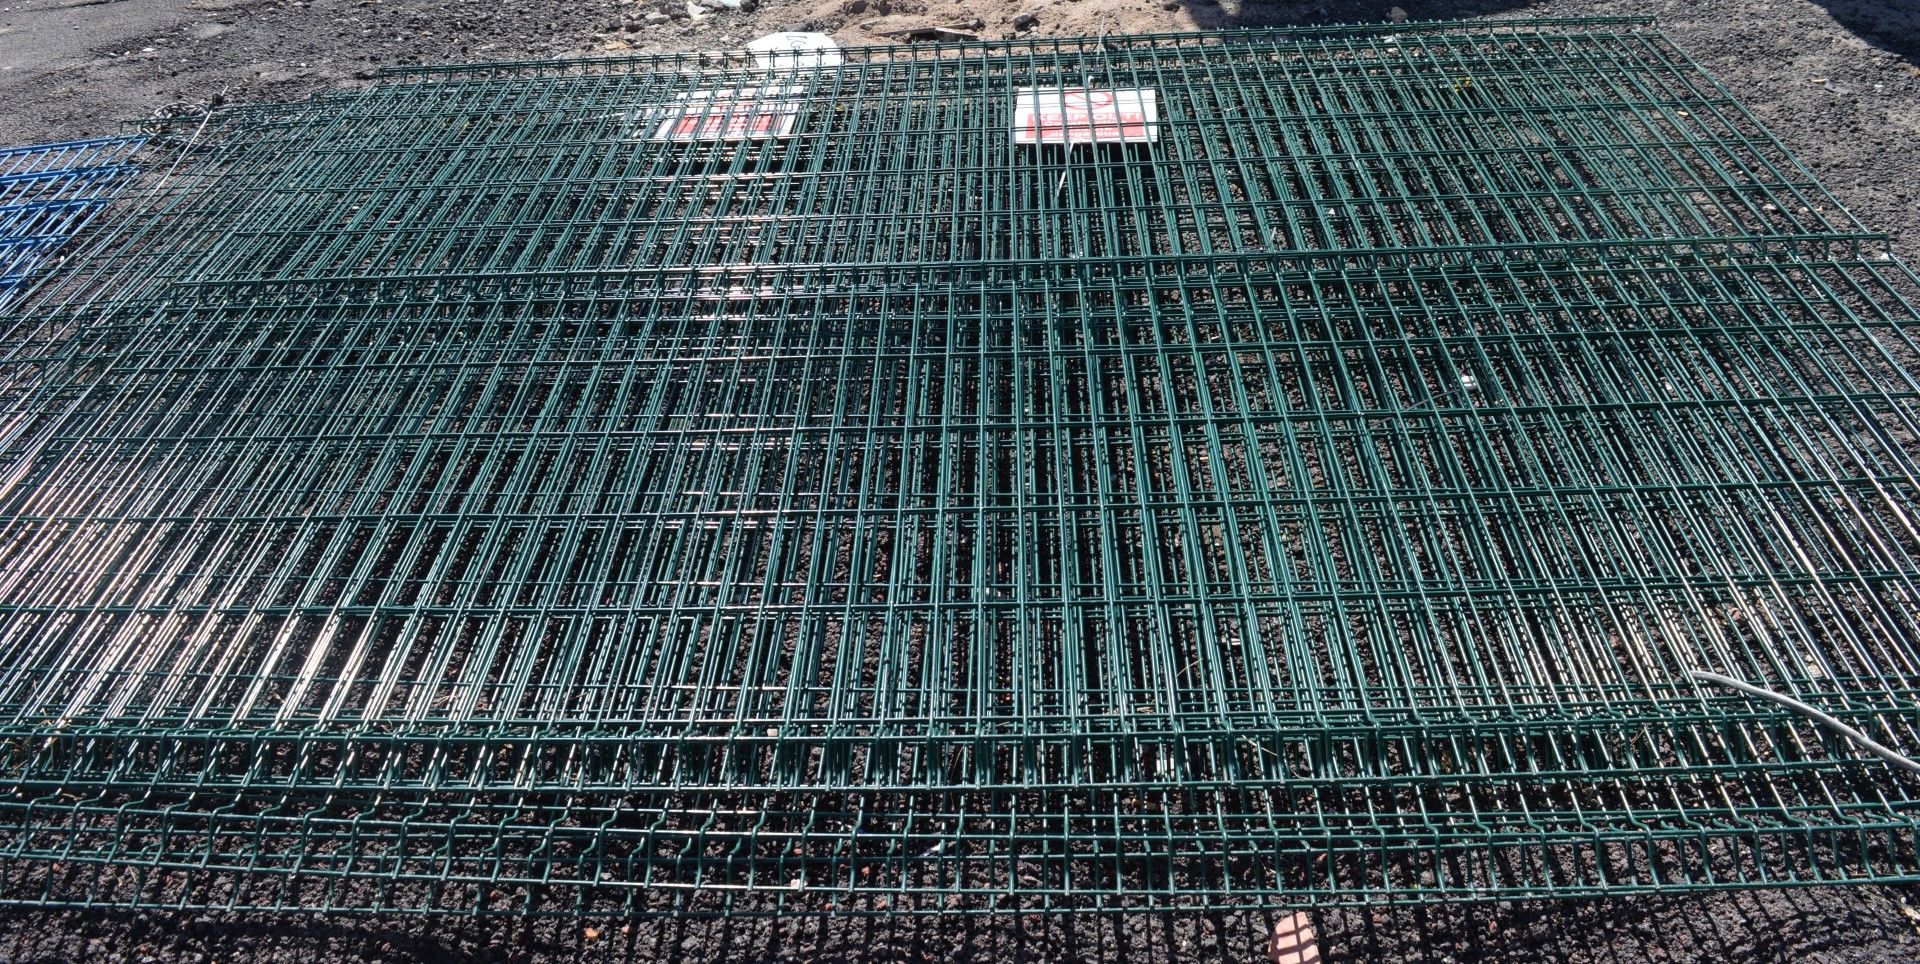 7 x Sections of Wire Fence in Green - Includes Fence Posts - Each Panel Measures 300 x 250 cms -